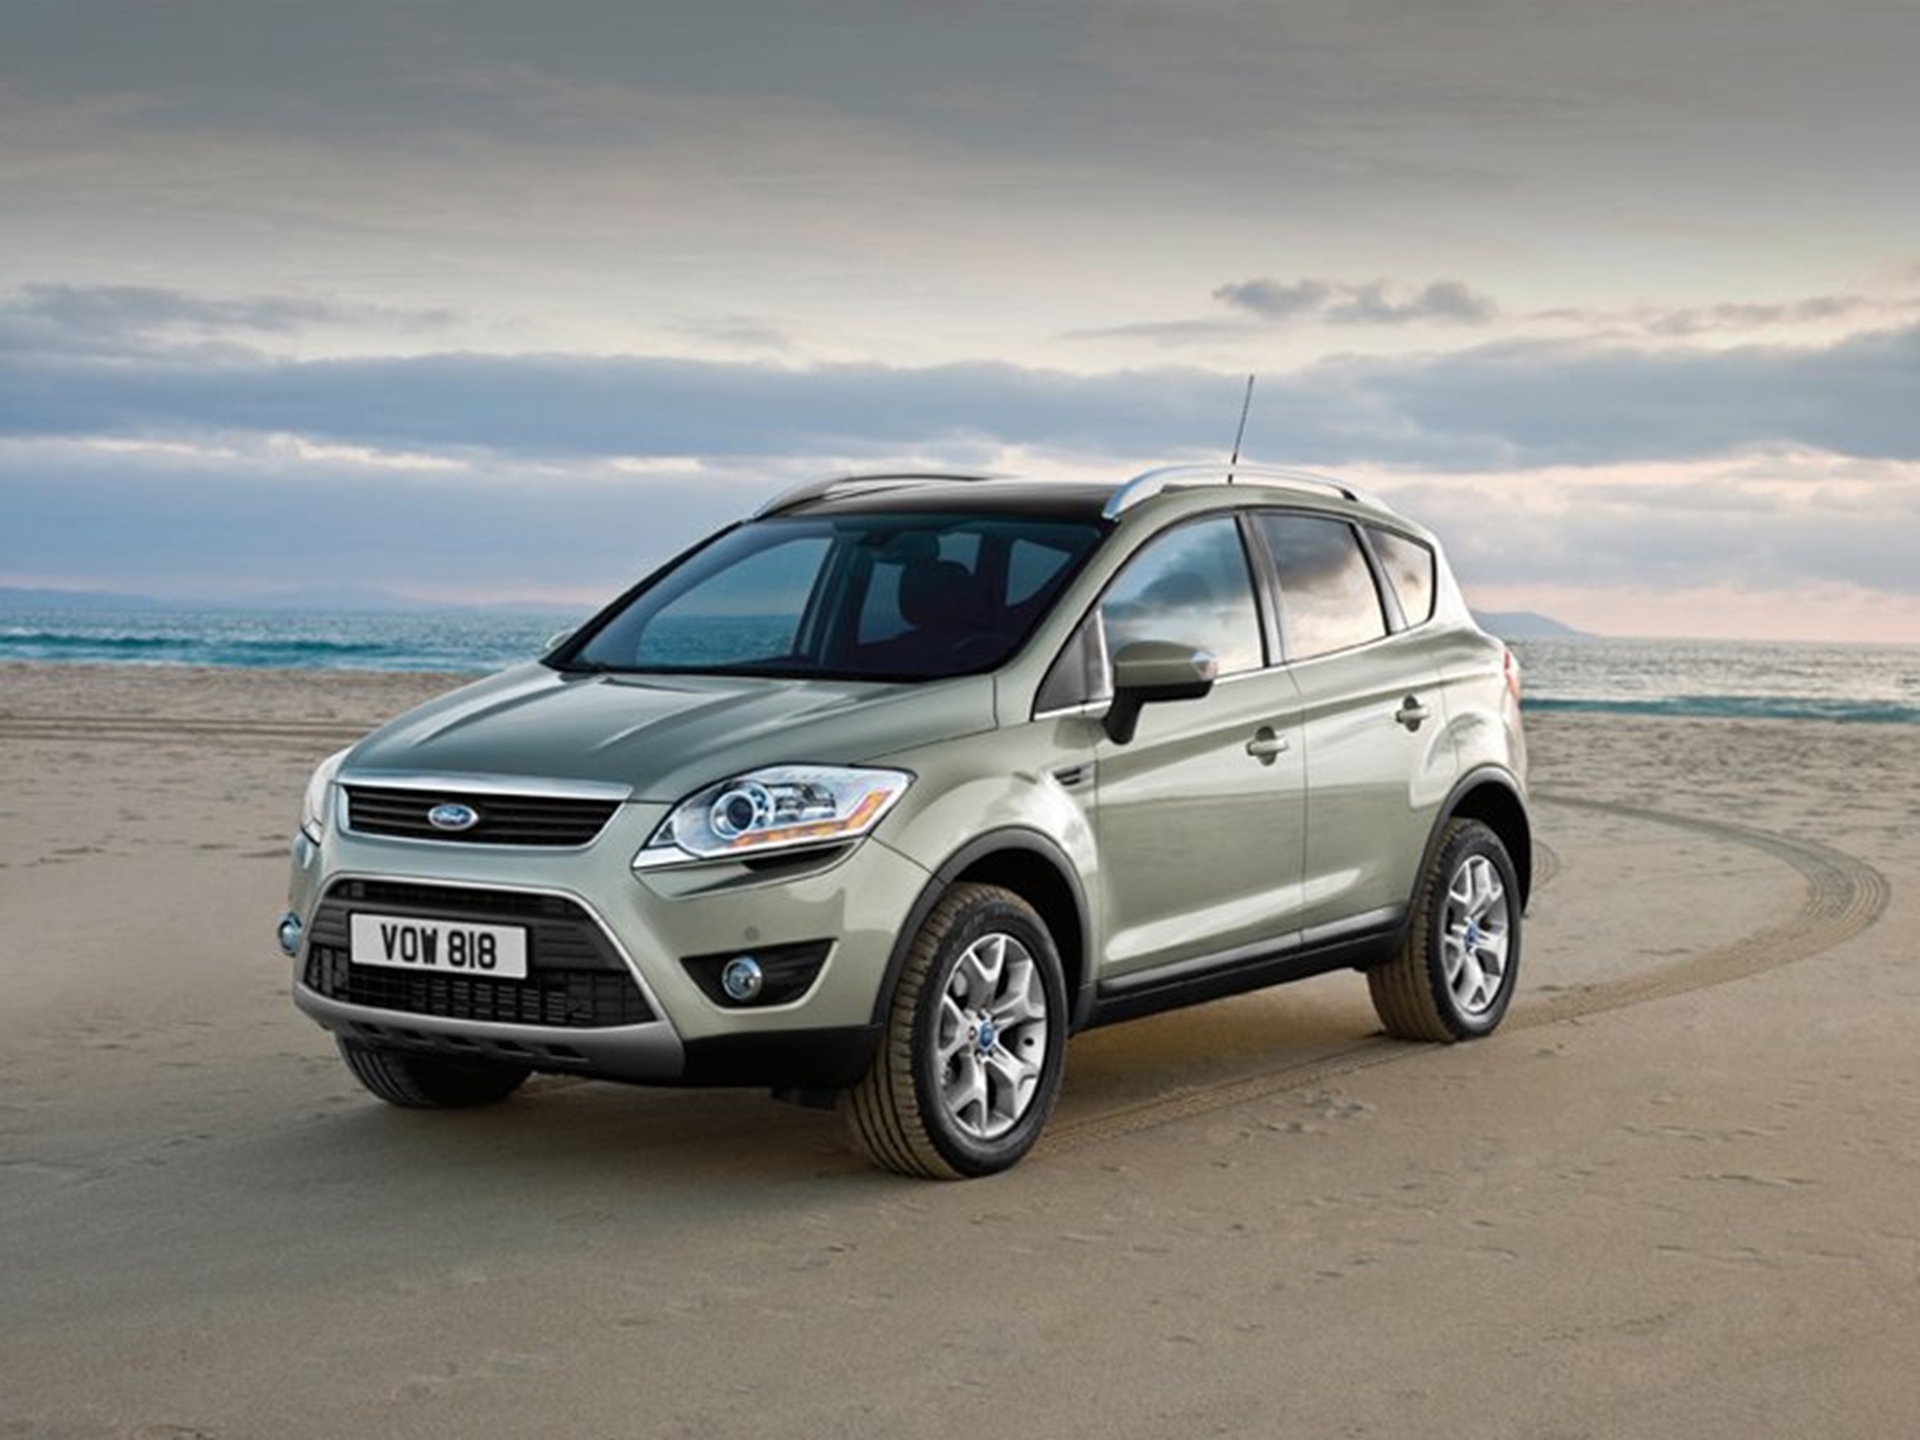 PUBLIC TO GET FIRST GLIMPSE OF FORD KUGA AT JOHANNESBURG MOTOR SHOW